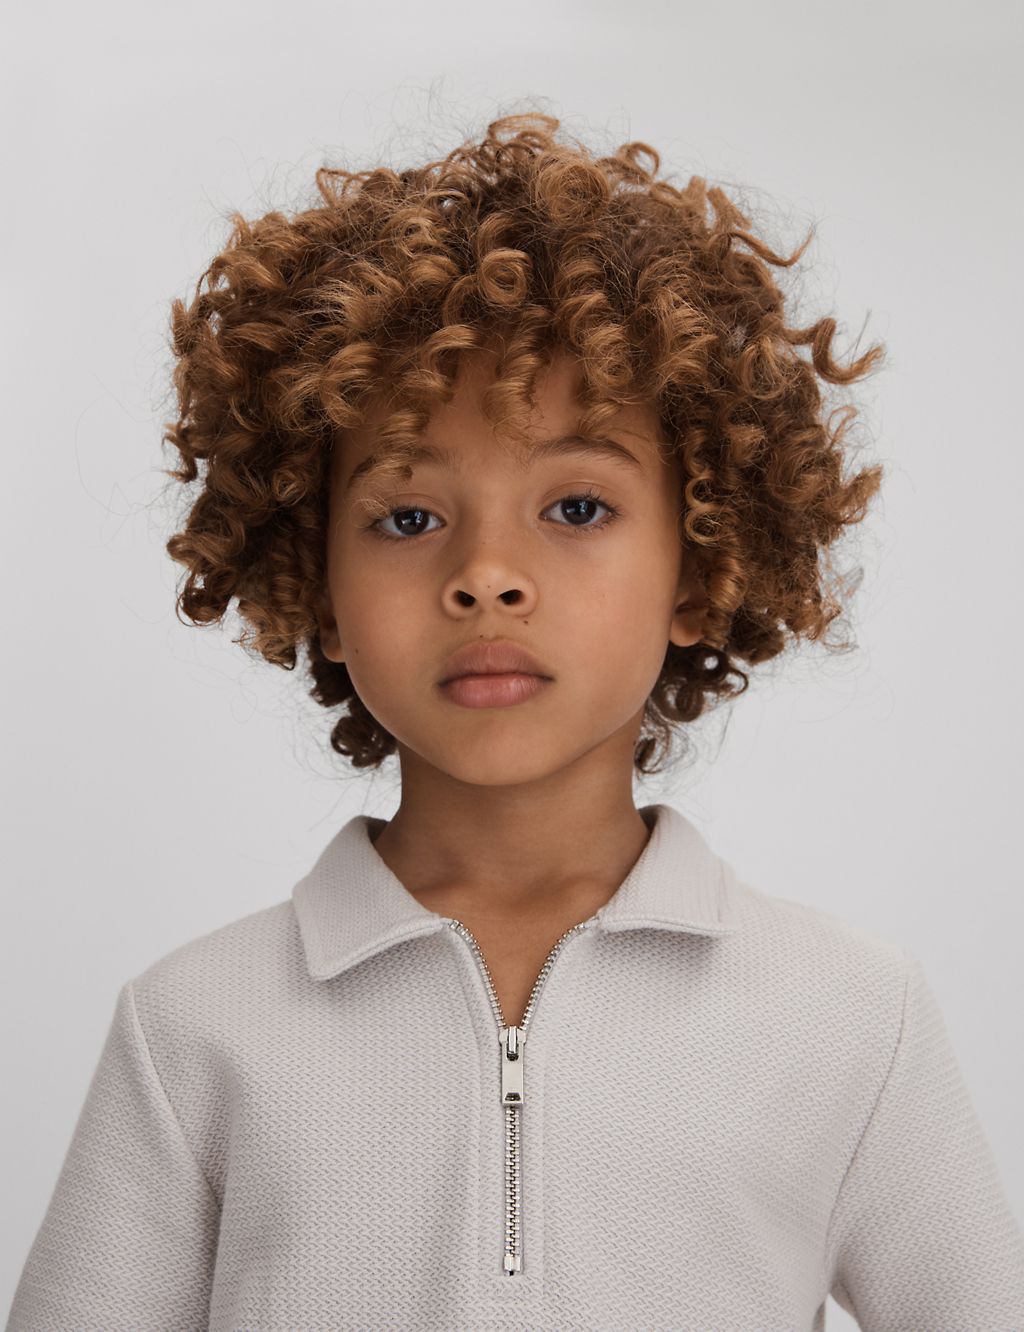 Pure Cotton Textured Polo Shirt (3-14 Yrs) 2 of 4